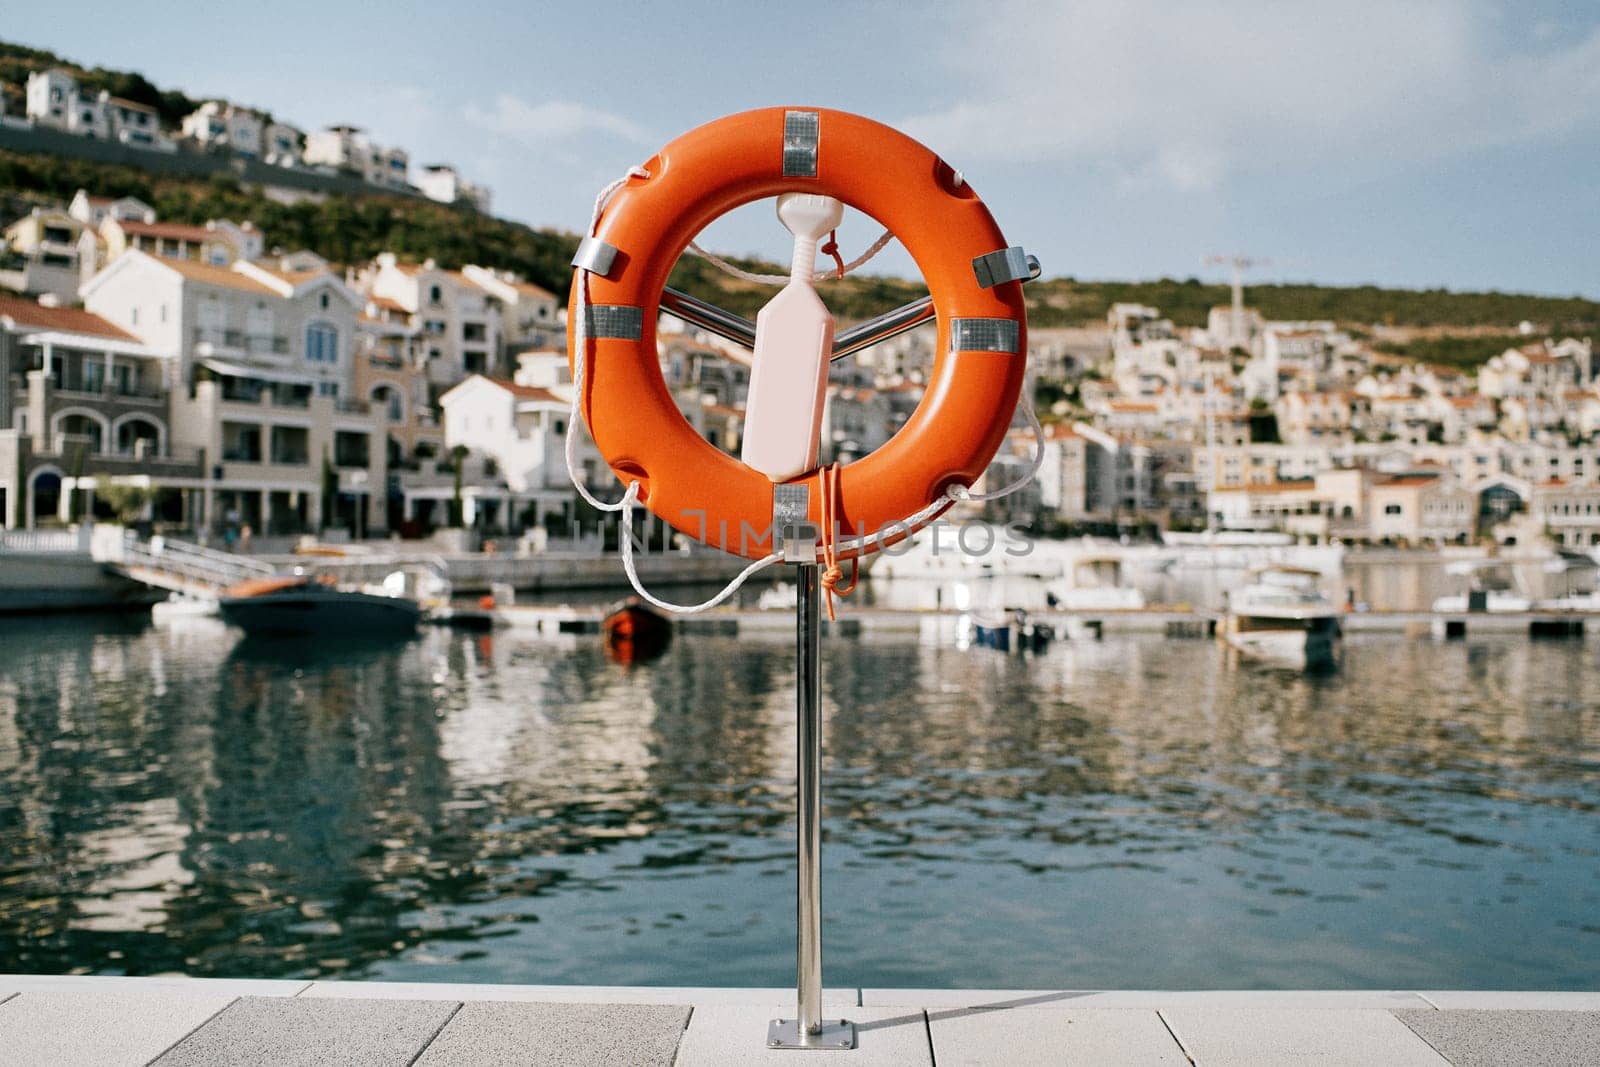 Lifebuoy on a stand with a latch stands on a pier in Lustica Bay. Montenegro by Nadtochiy